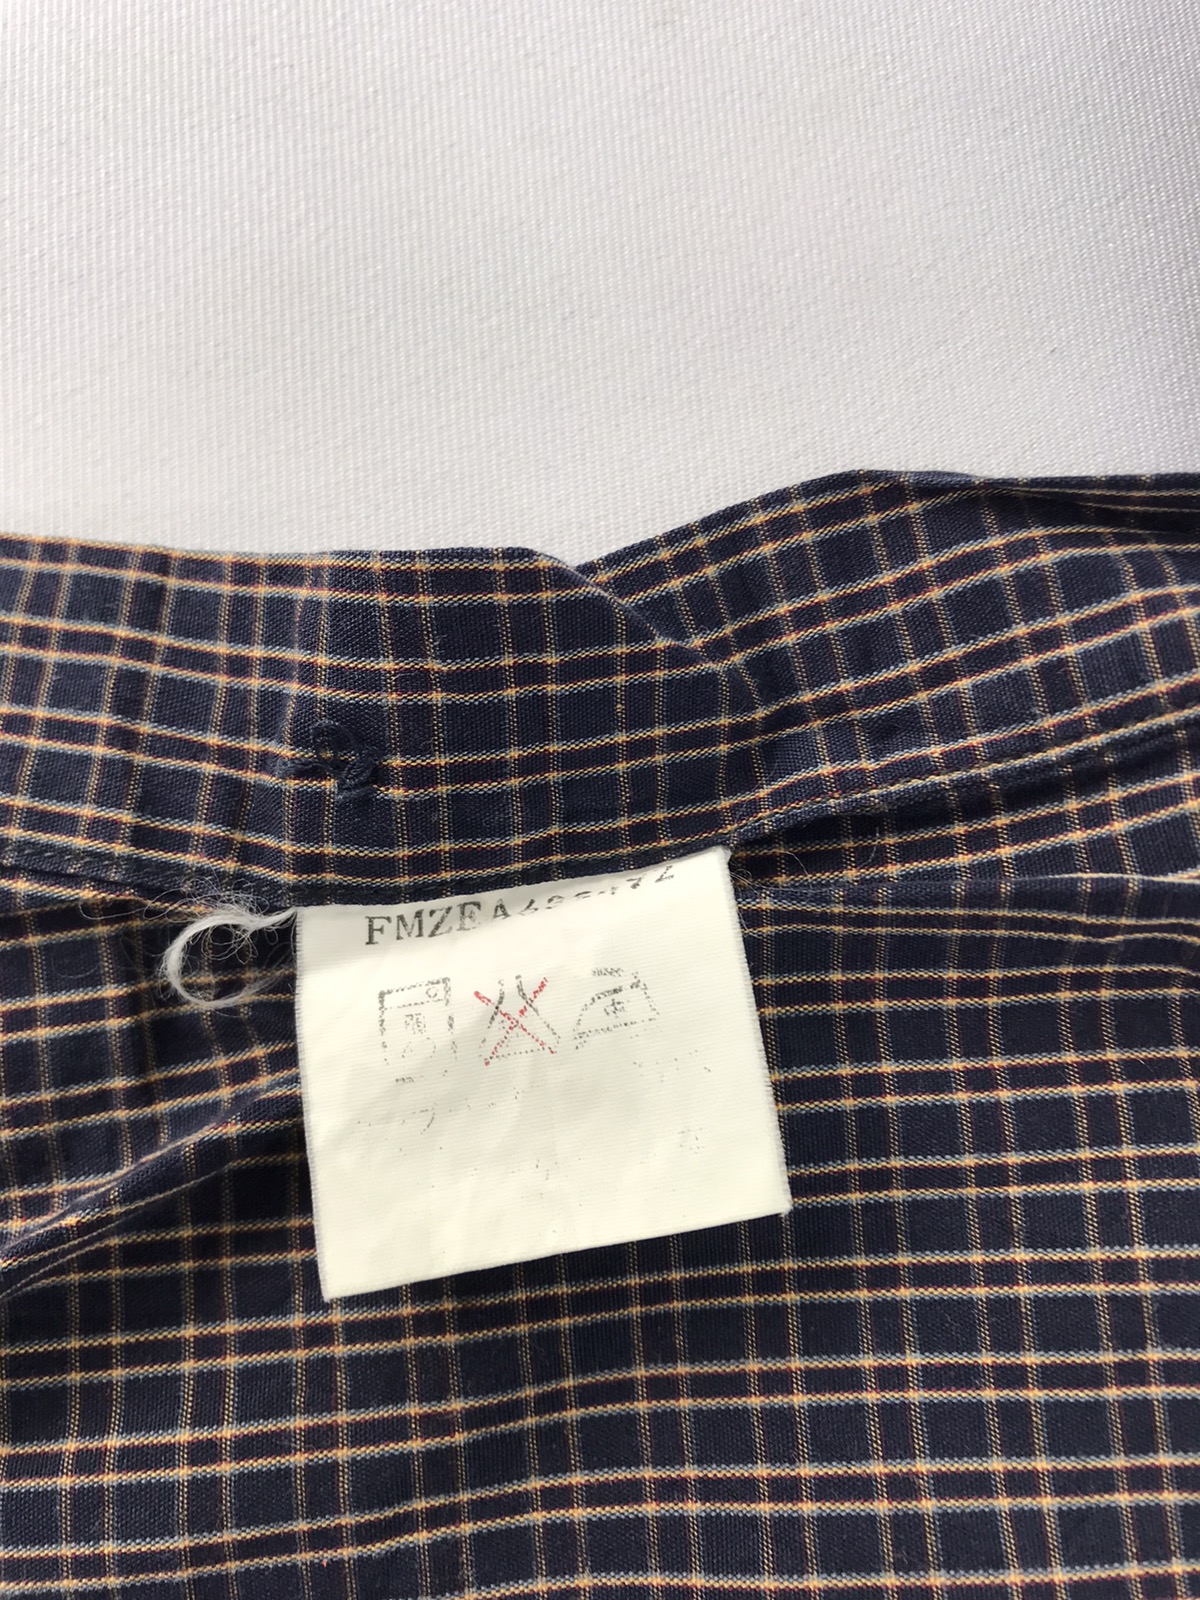 Cheng And Chie Moschino Shirt Single Pocket Striped Checked - 7